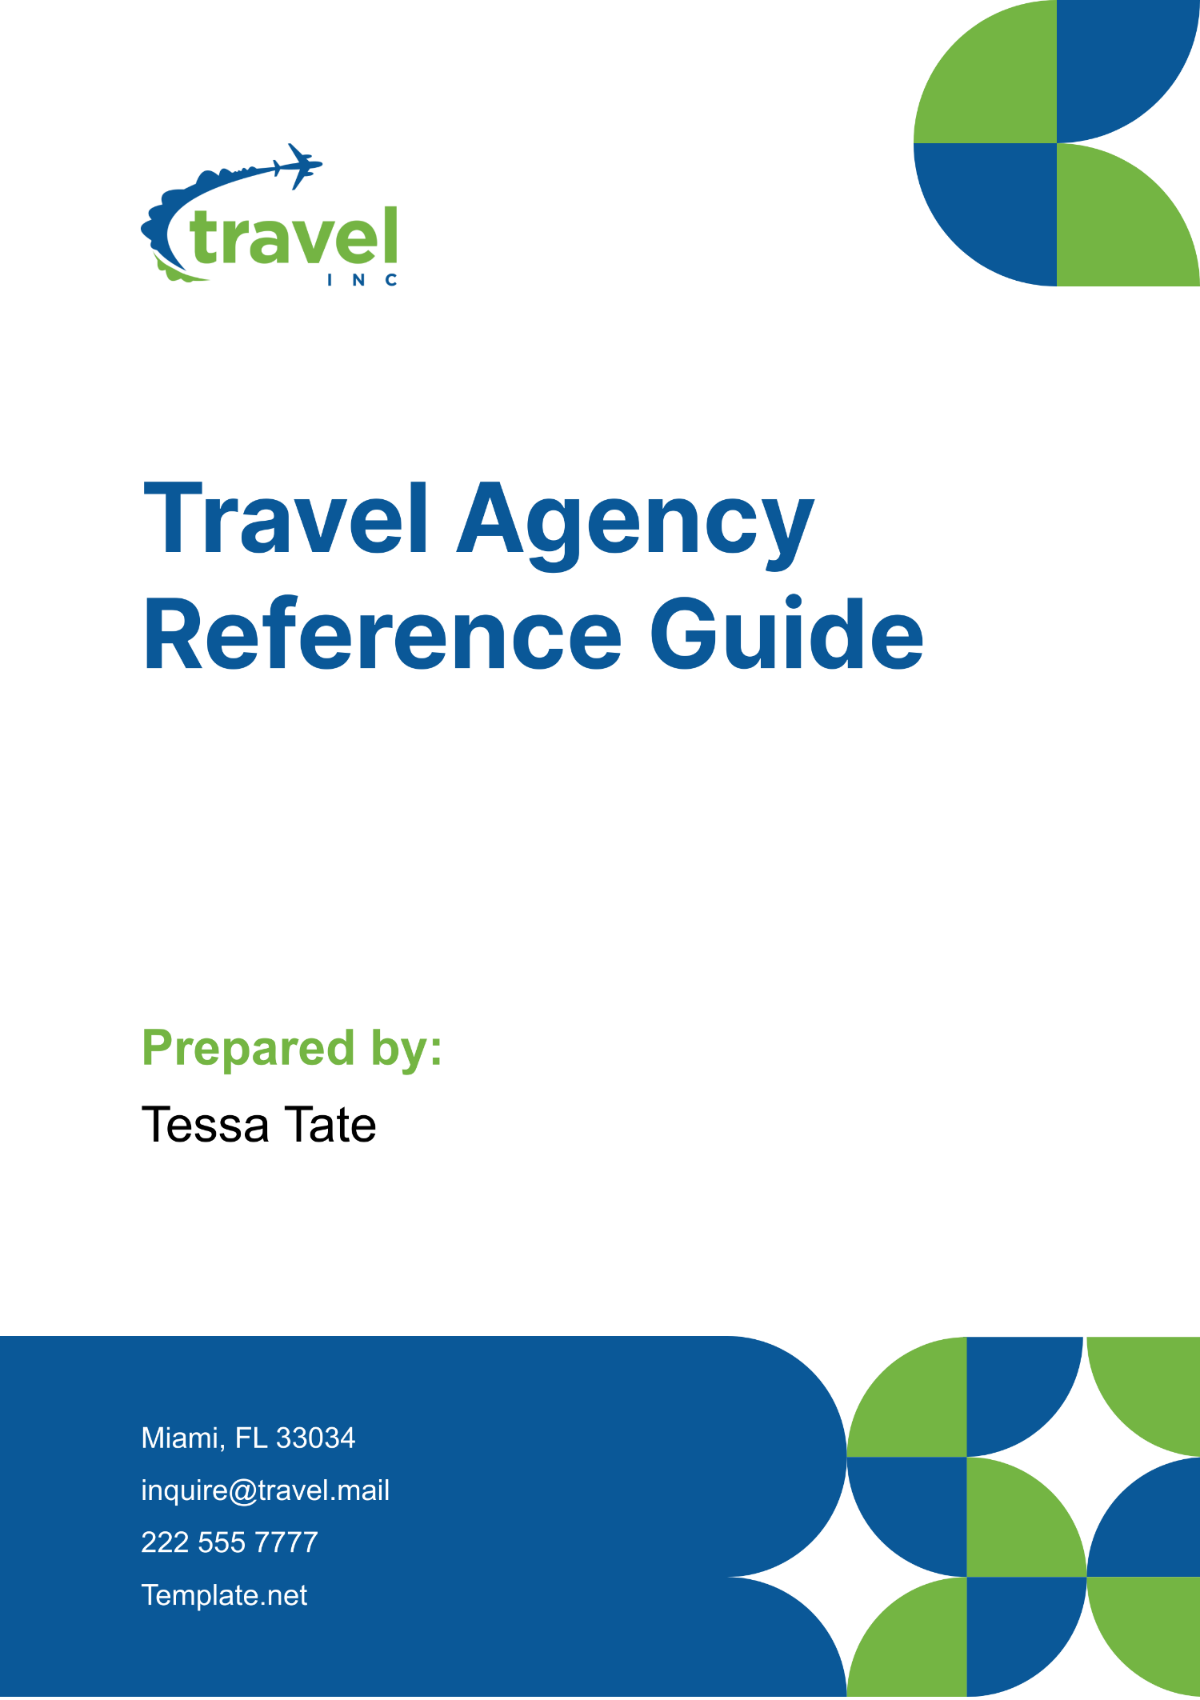 Travel Agency Reference Guide Template